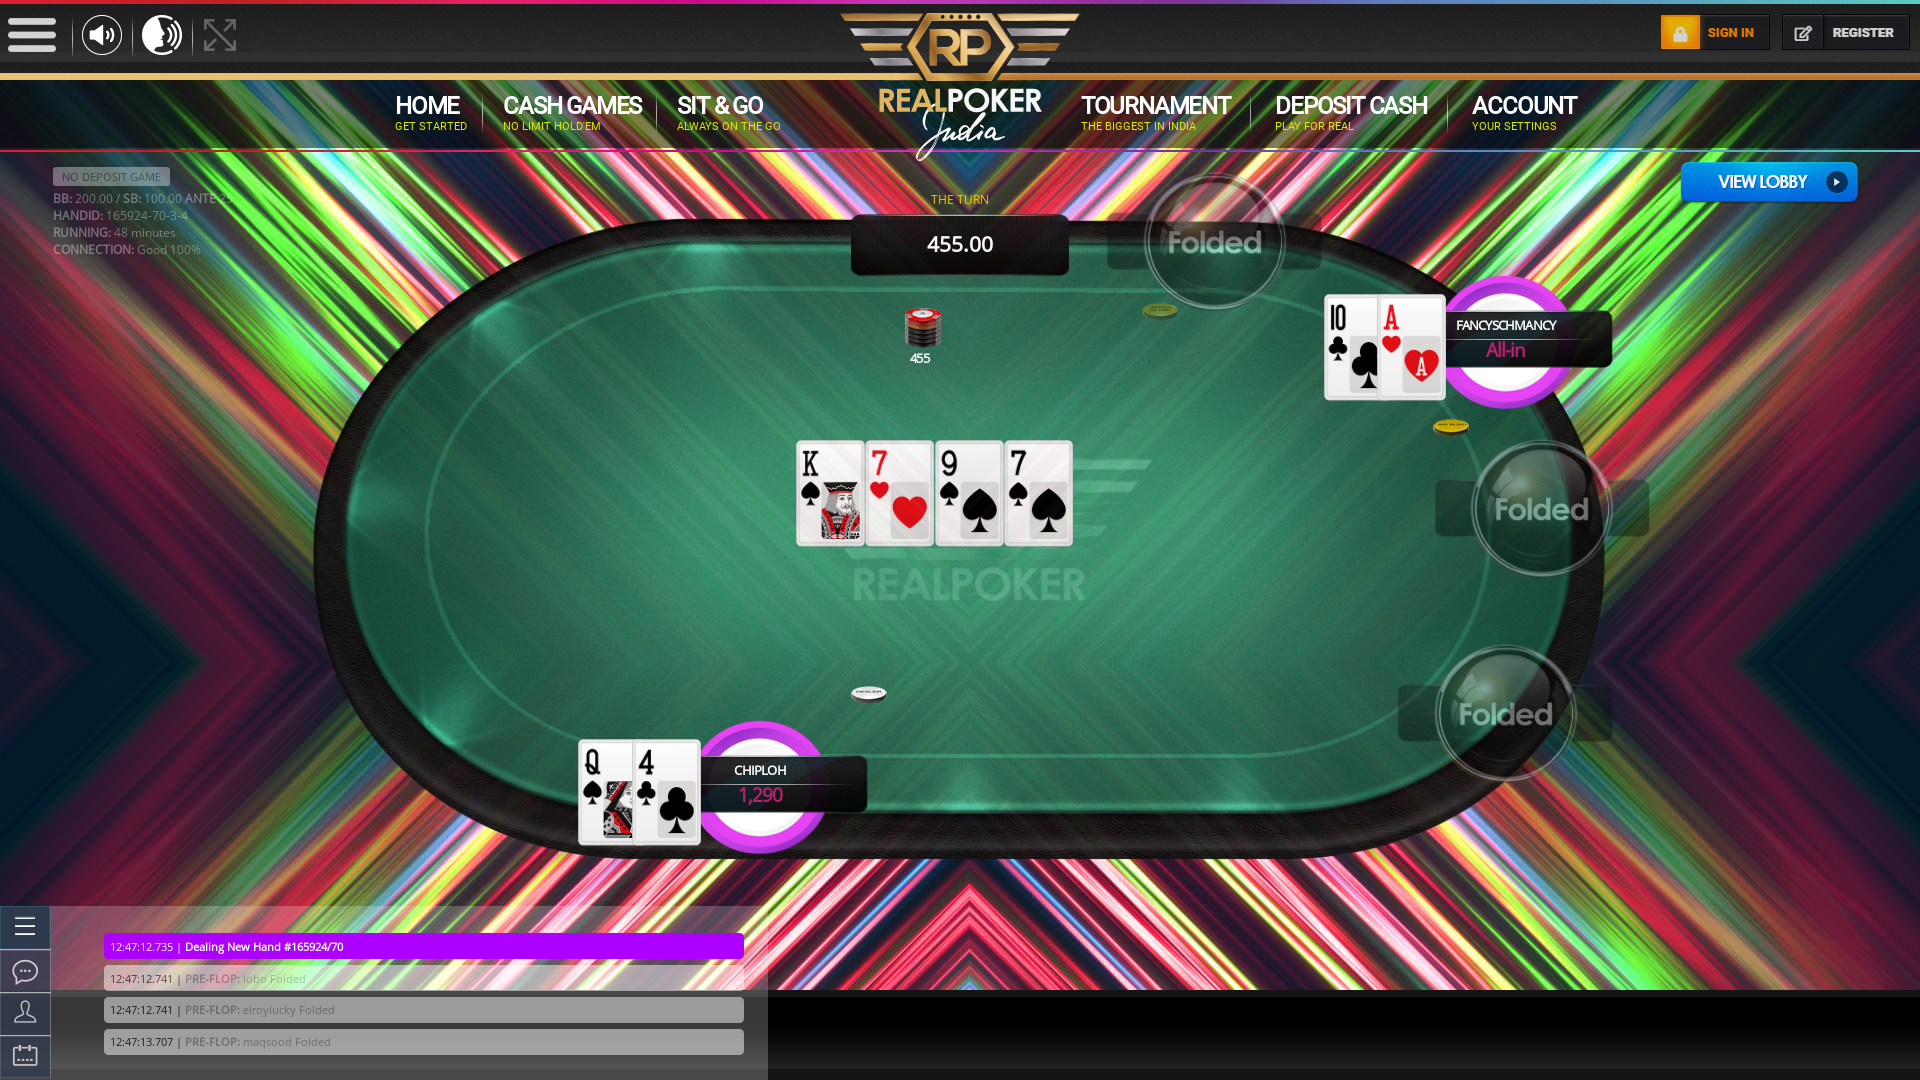 Online poker on a 10 player table in the 48th minute match up